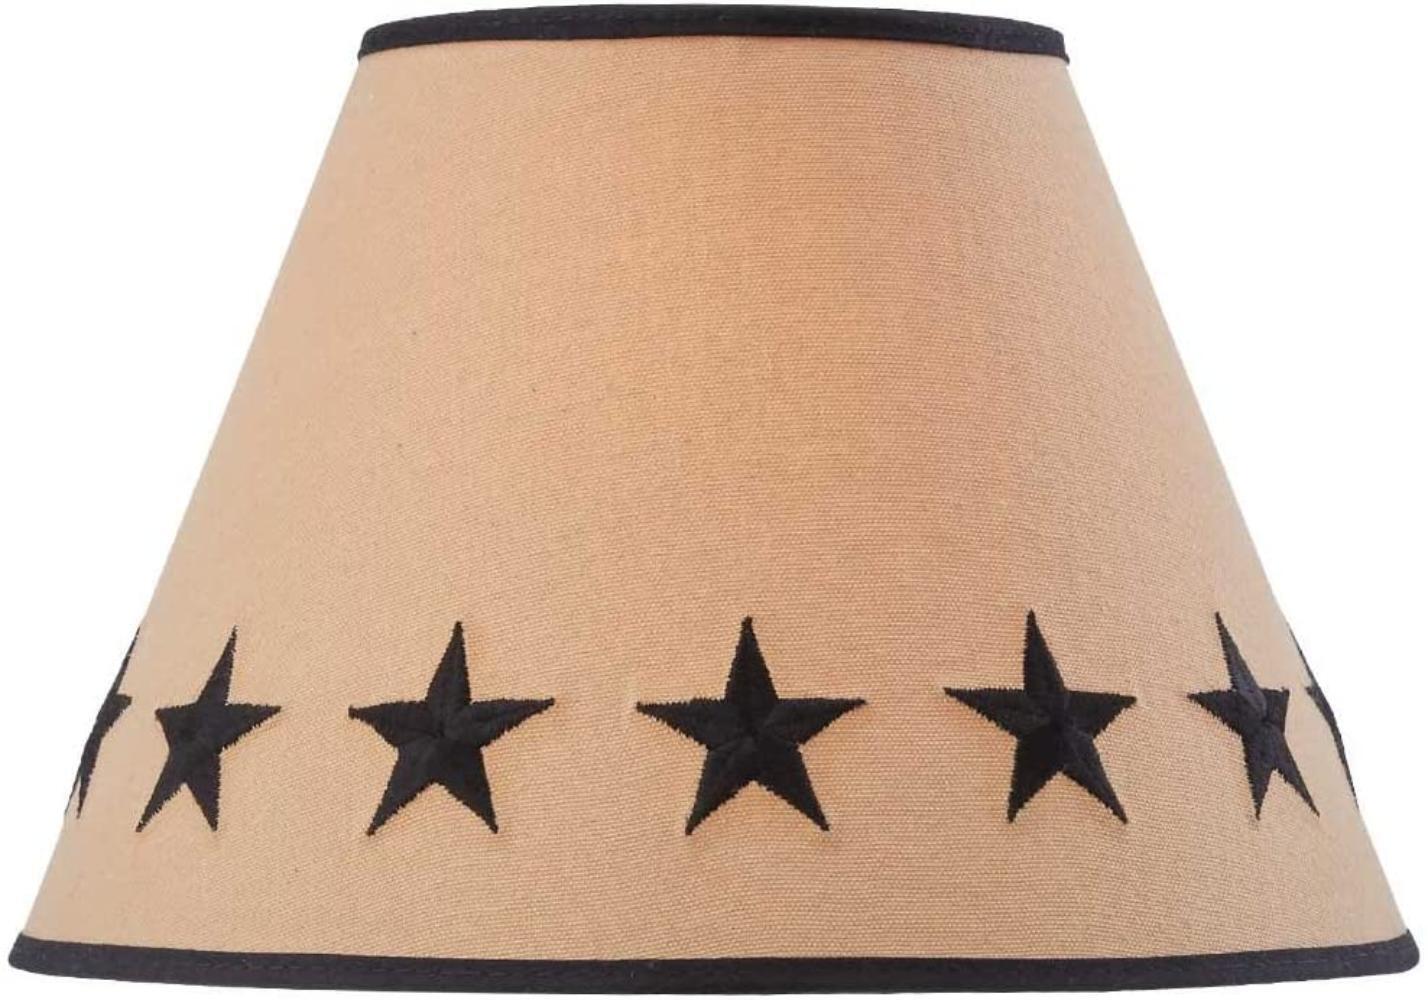 Southwestern lamp shades in a simpler pattern 